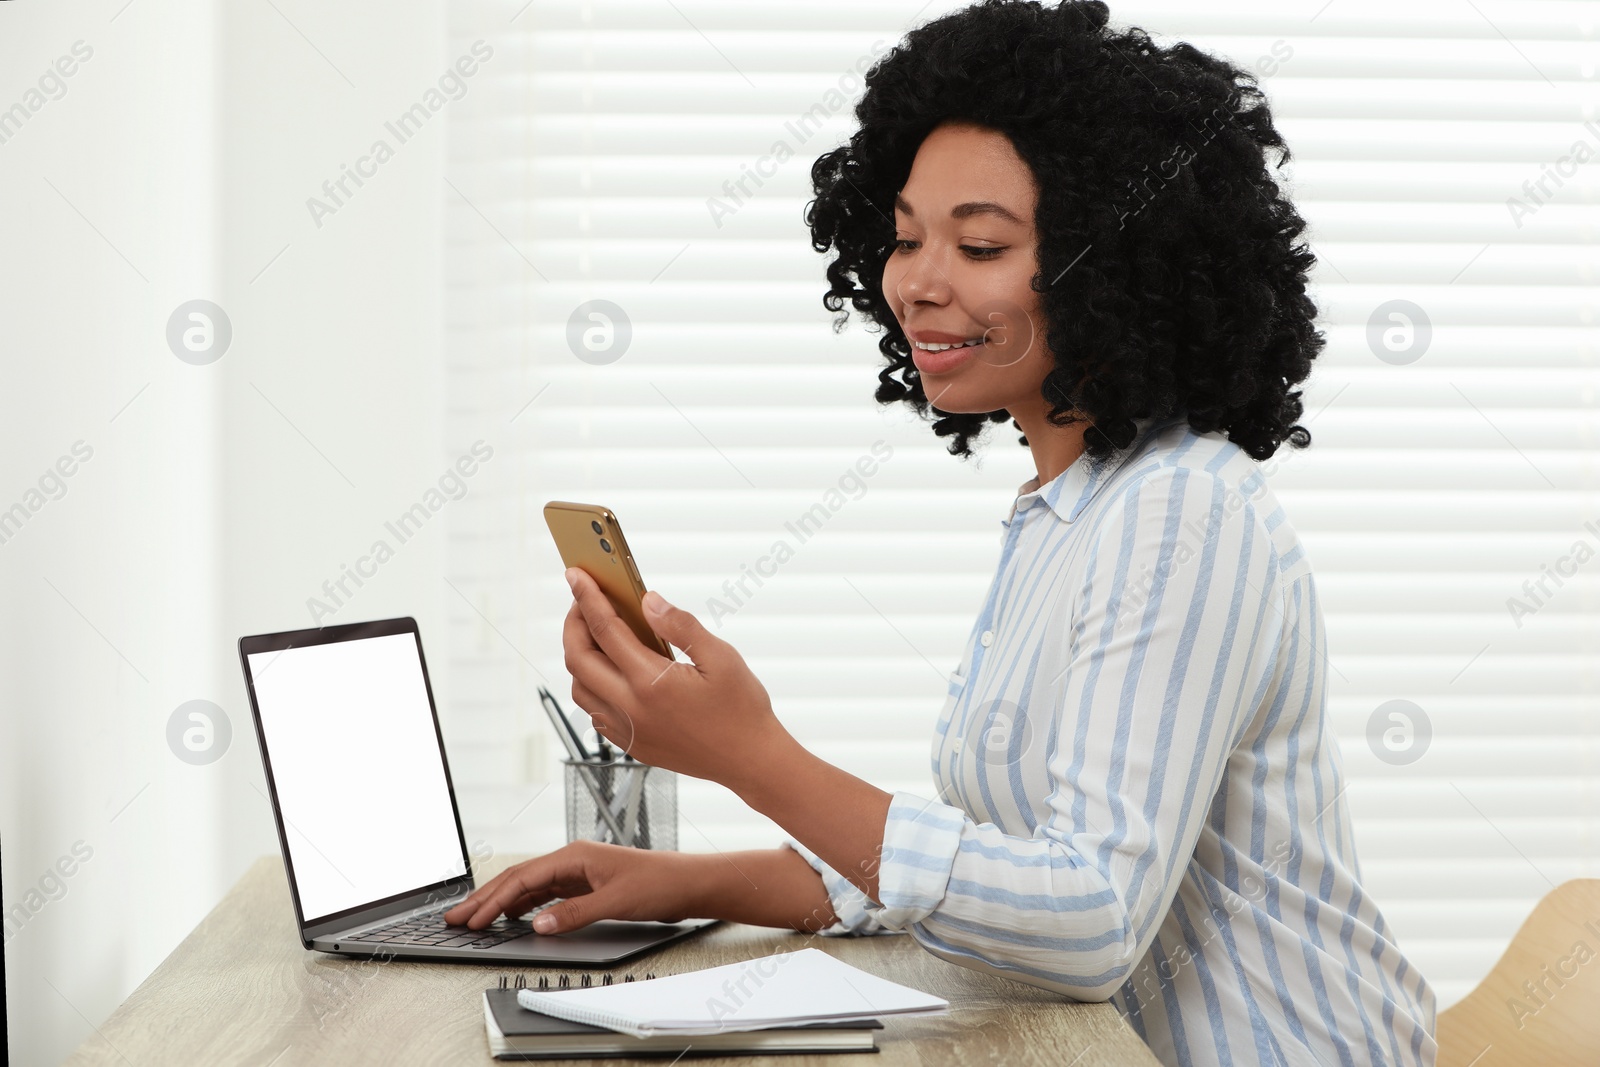 Photo of Happy young woman with smartphone using laptop at wooden desk indoors